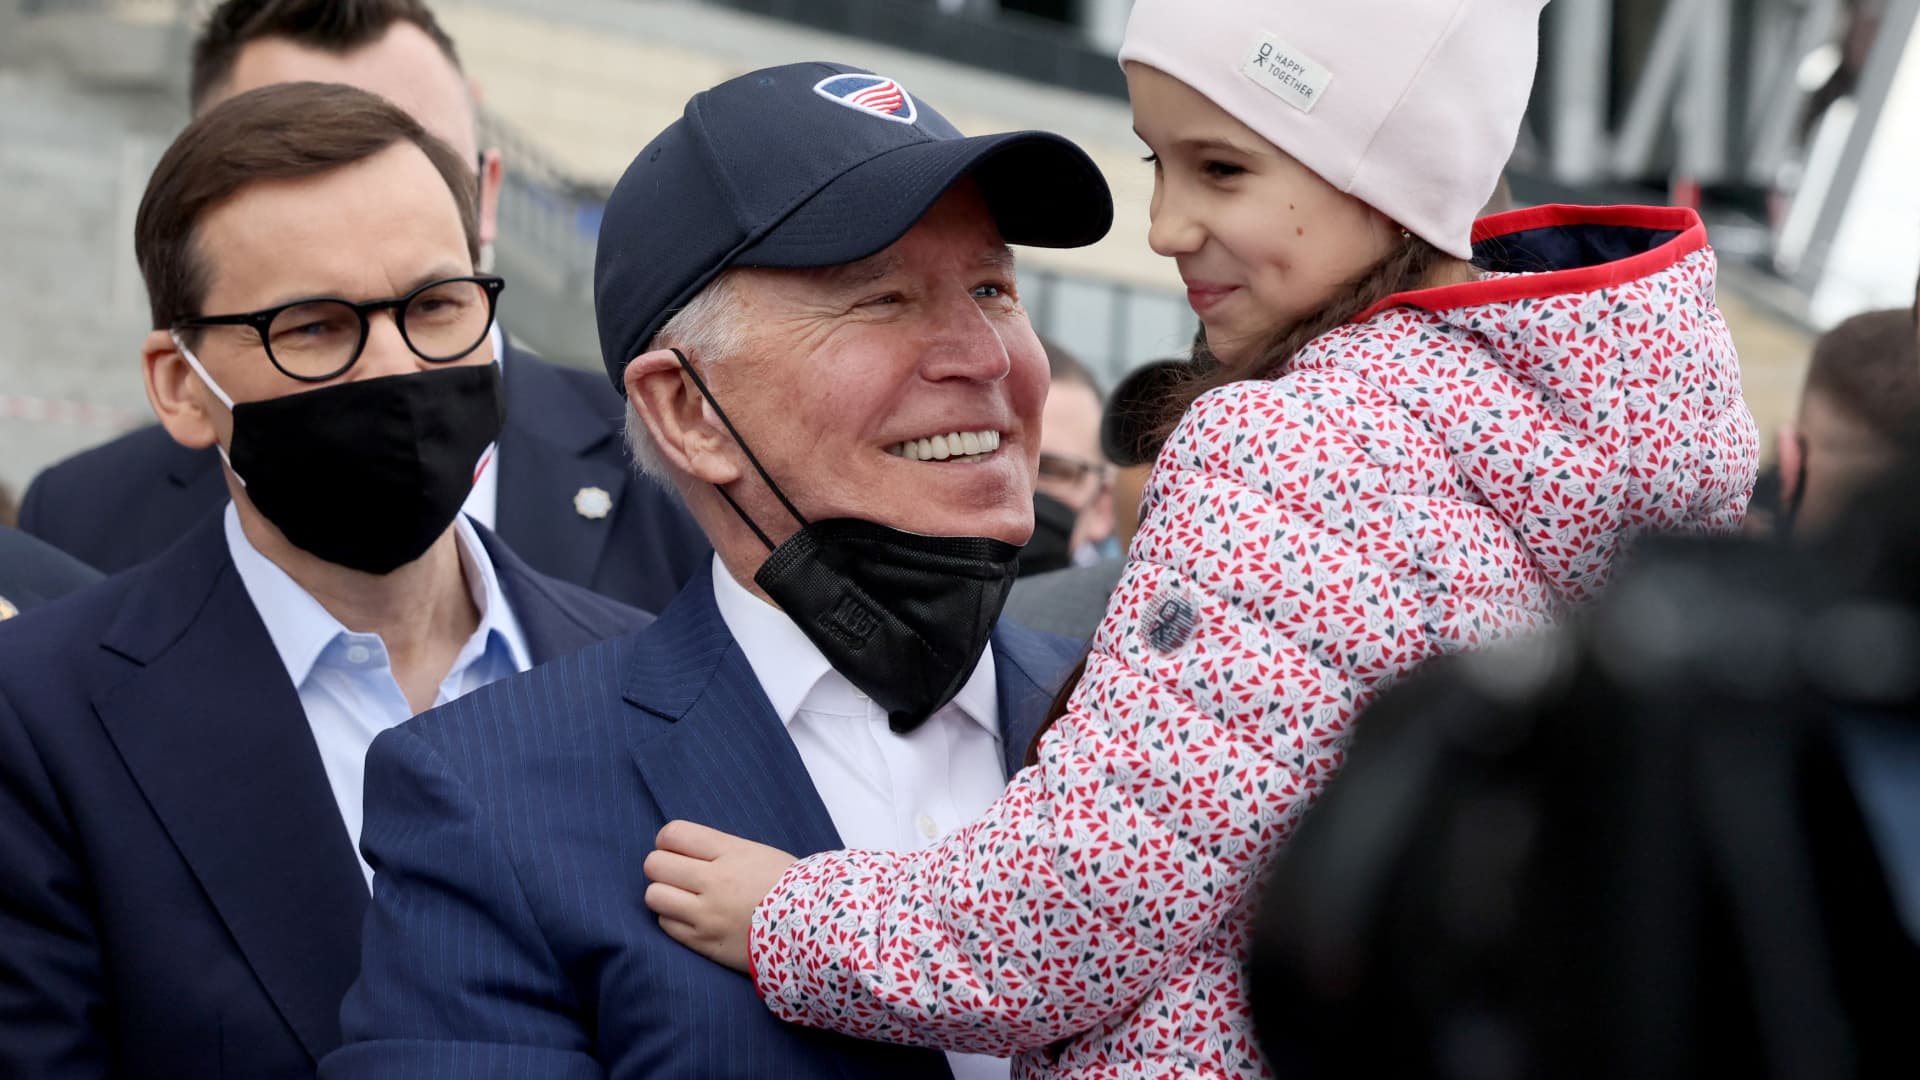 U.S. President Joe Biden, flanked by Polish Prime MInister Mateusz Morawiecki, holds a child as he visits Ukrainian refugees at the PGE National Stadium, in Warsaw, Poland March 26, 2022.